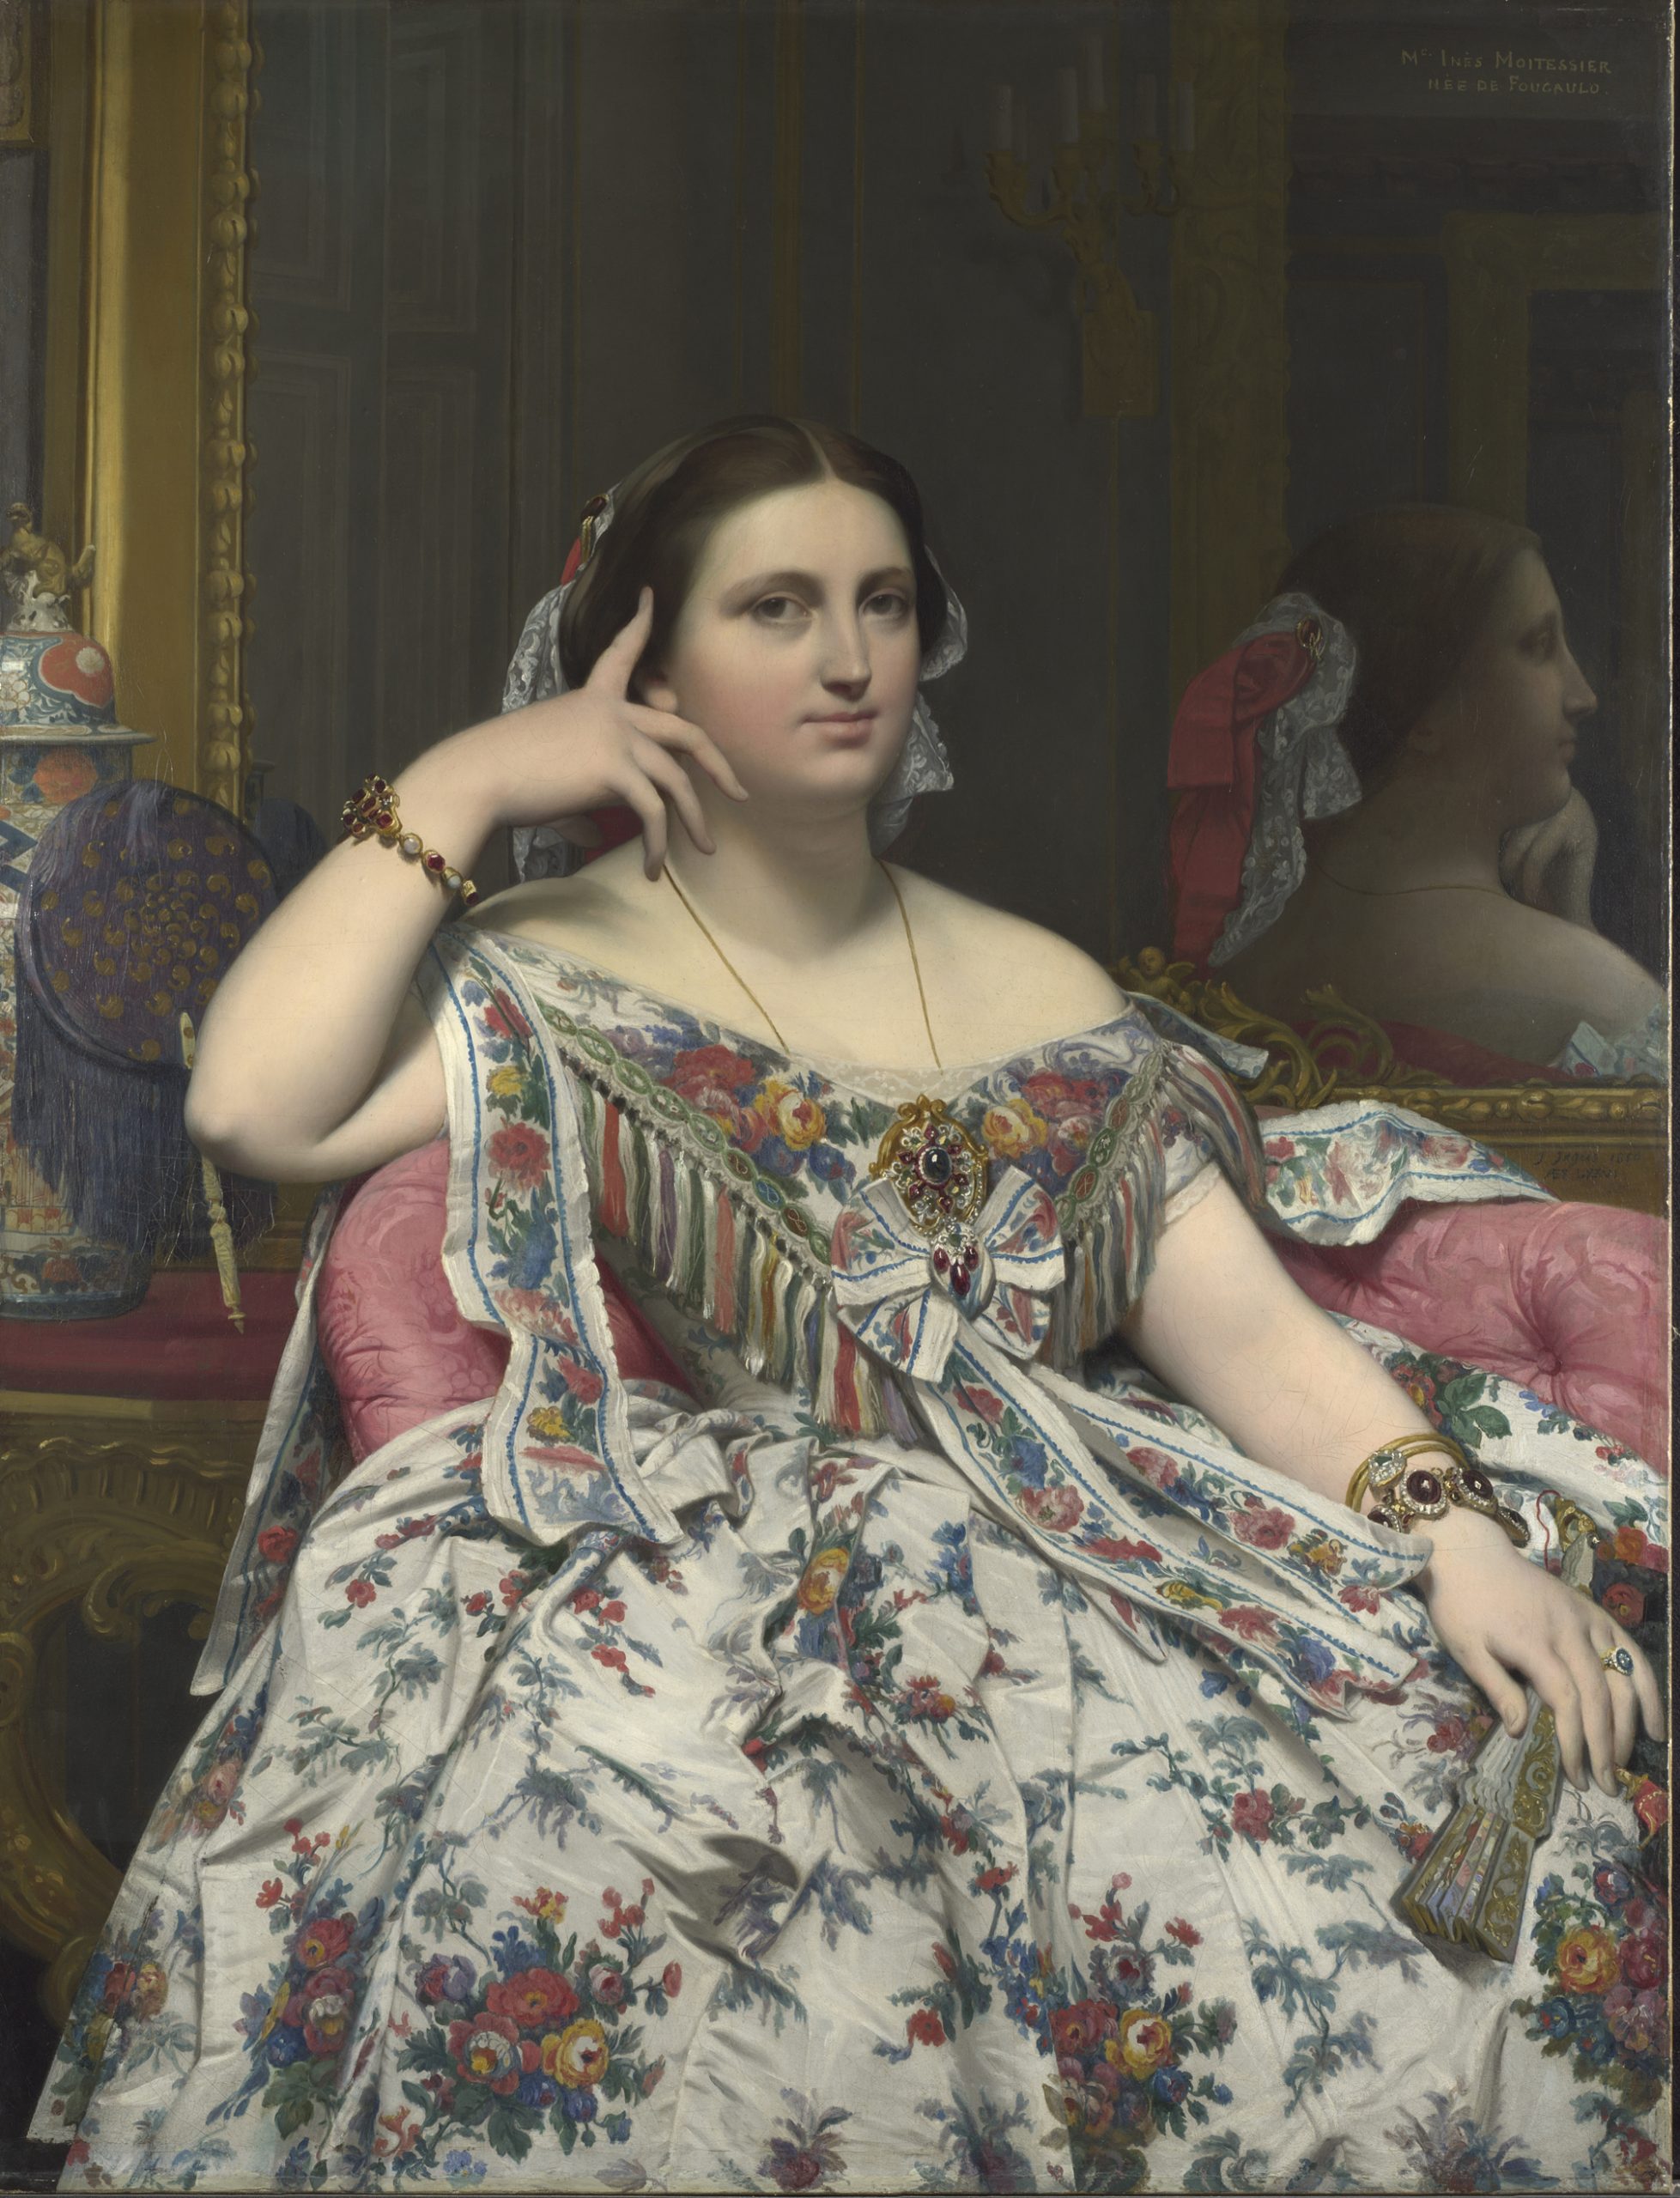 Jean-Auguste-Dominique Ingres, Madame Moitessier, 1856, Oil on canvas, 120x92.1 cm, © The National Gallery, London